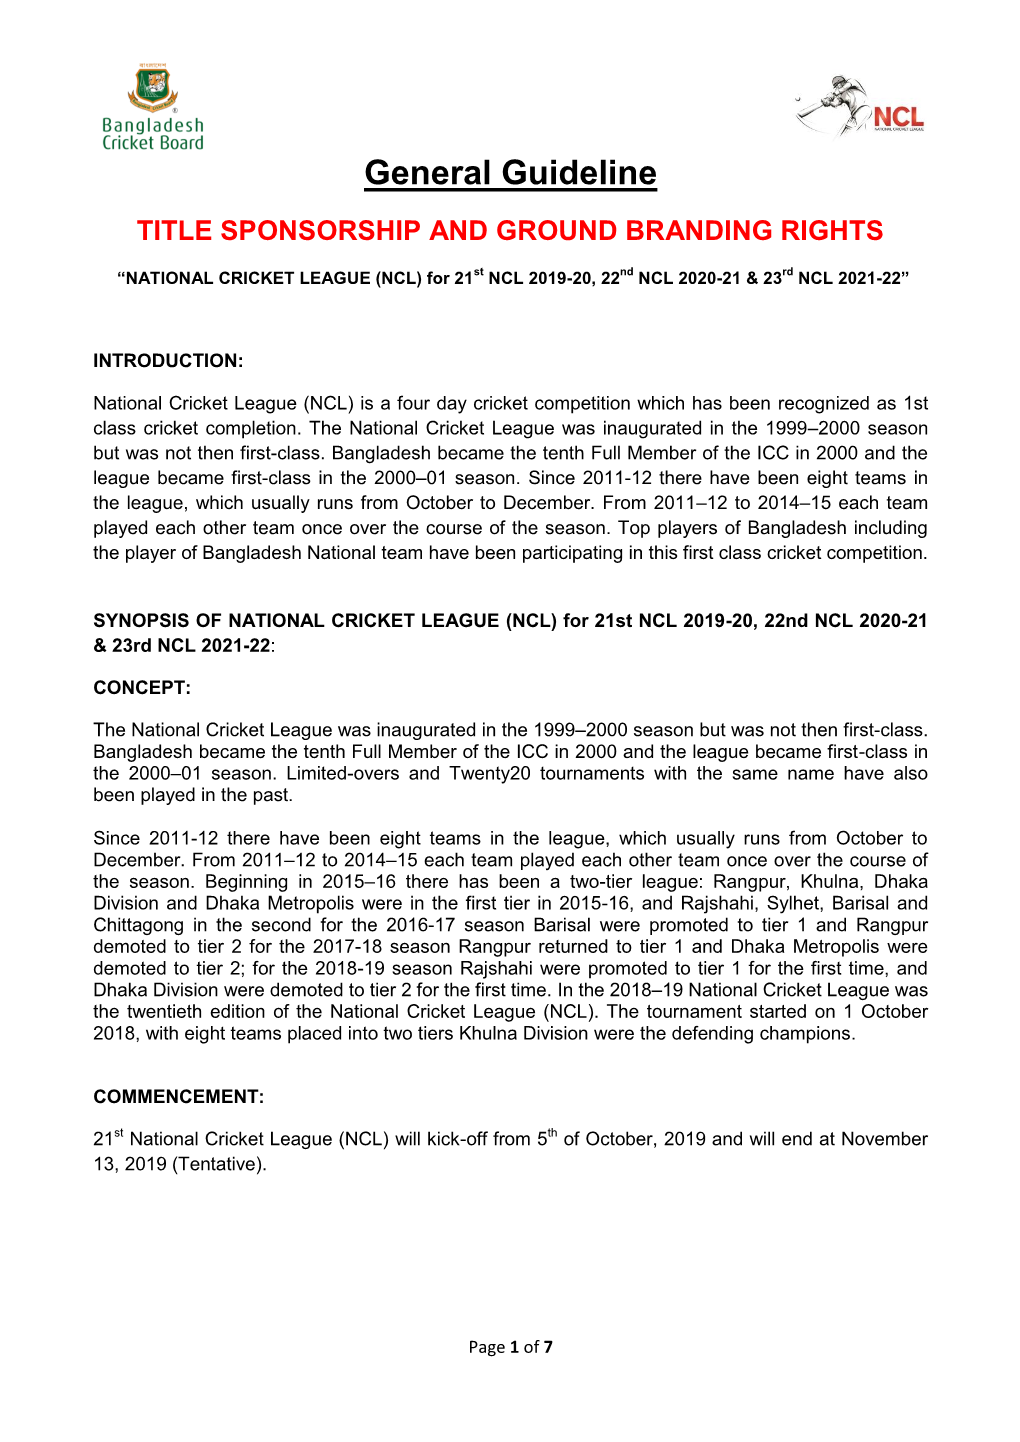 GENERAL GUIDELINE for EOI SUBMISSION of TITLE SPONSORSHIP GROUND BRANDING RIGHTS